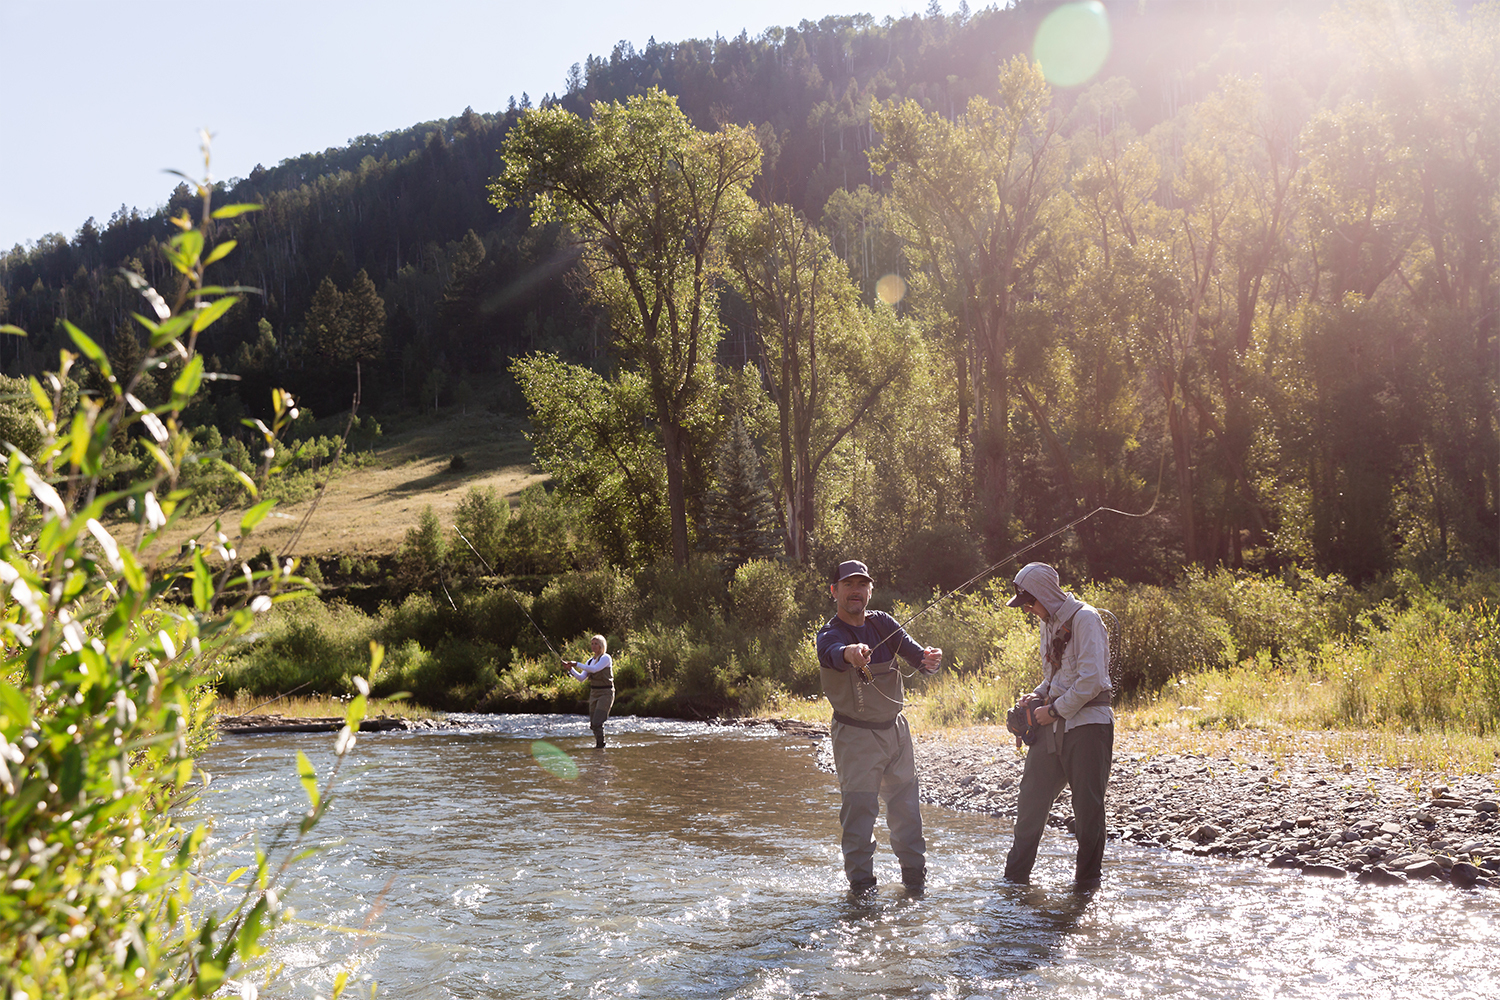 Fly Fishing in Telluride, Colorado, as part of the Reset trekking retreat